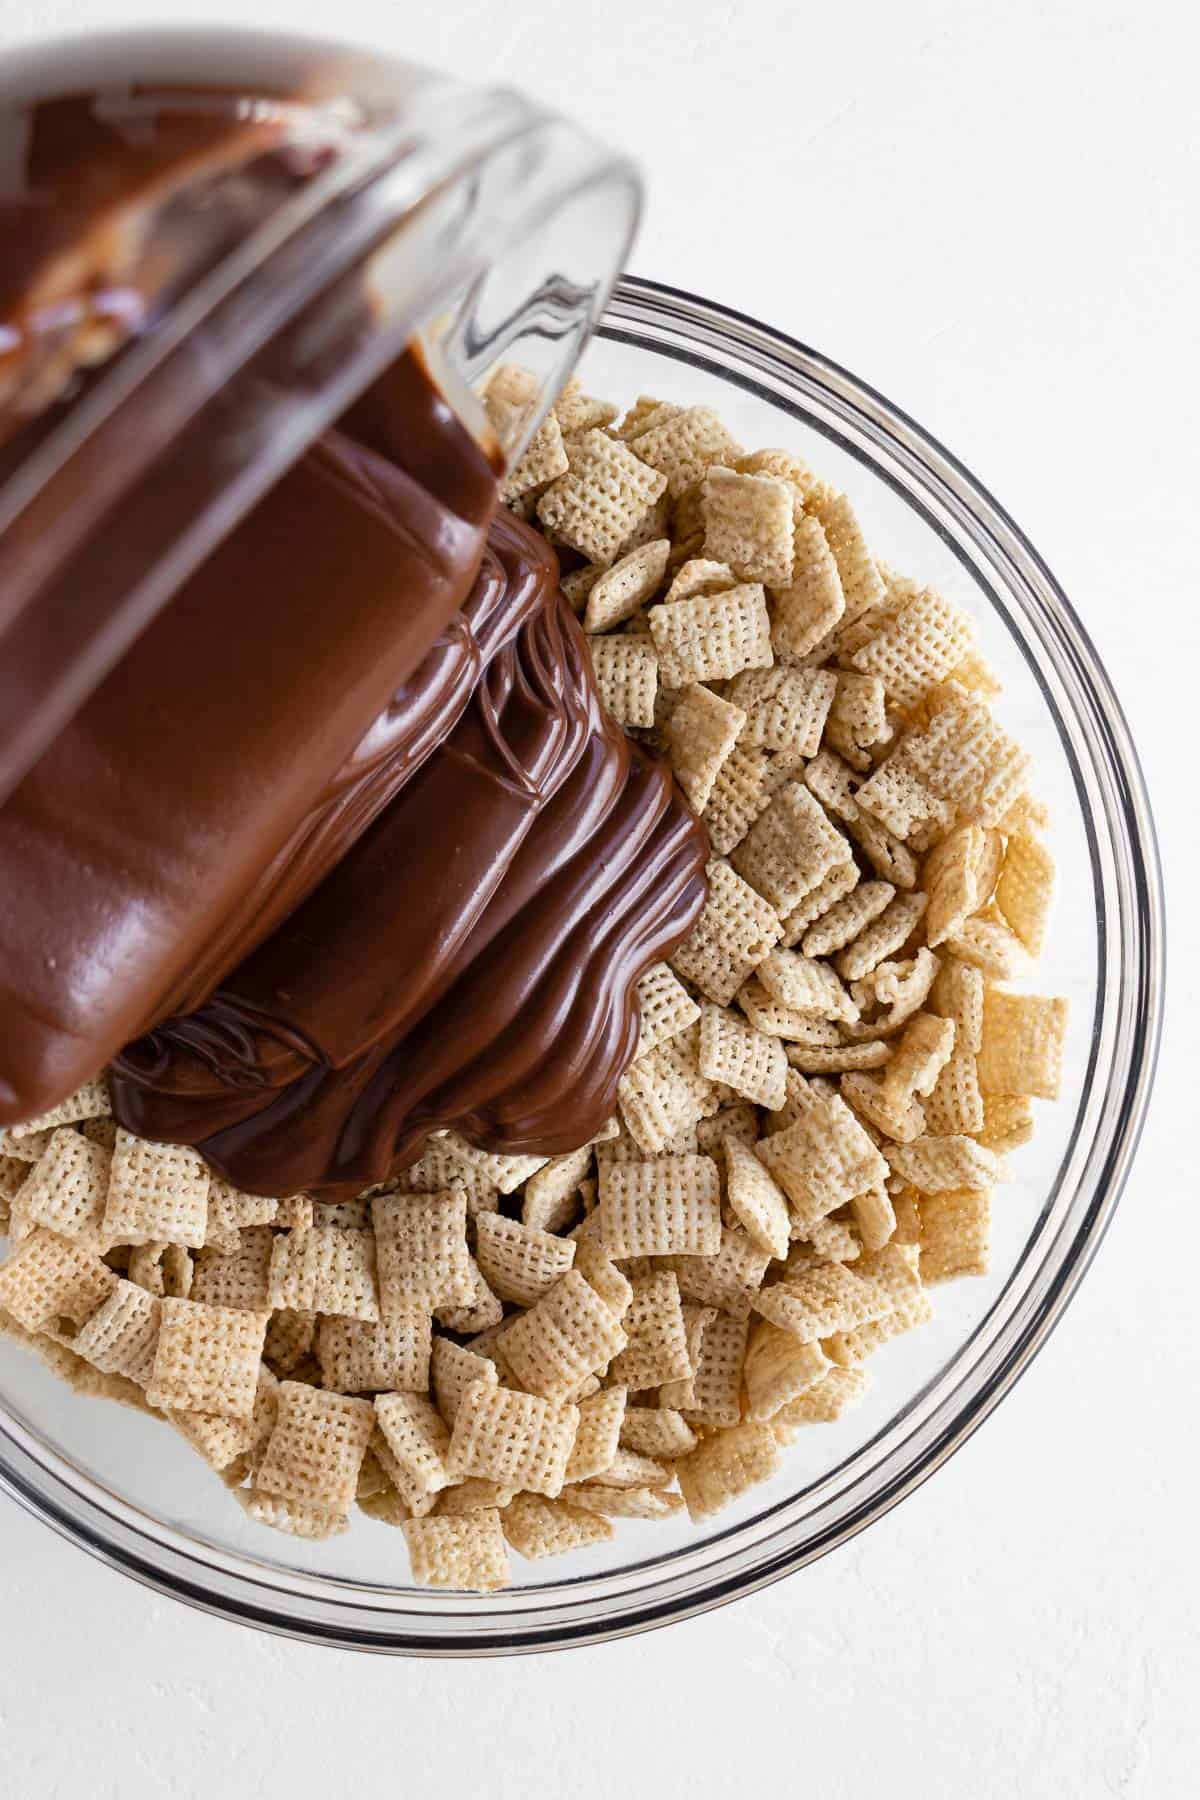 melted chocolate being poured over a bowl of chex cereal